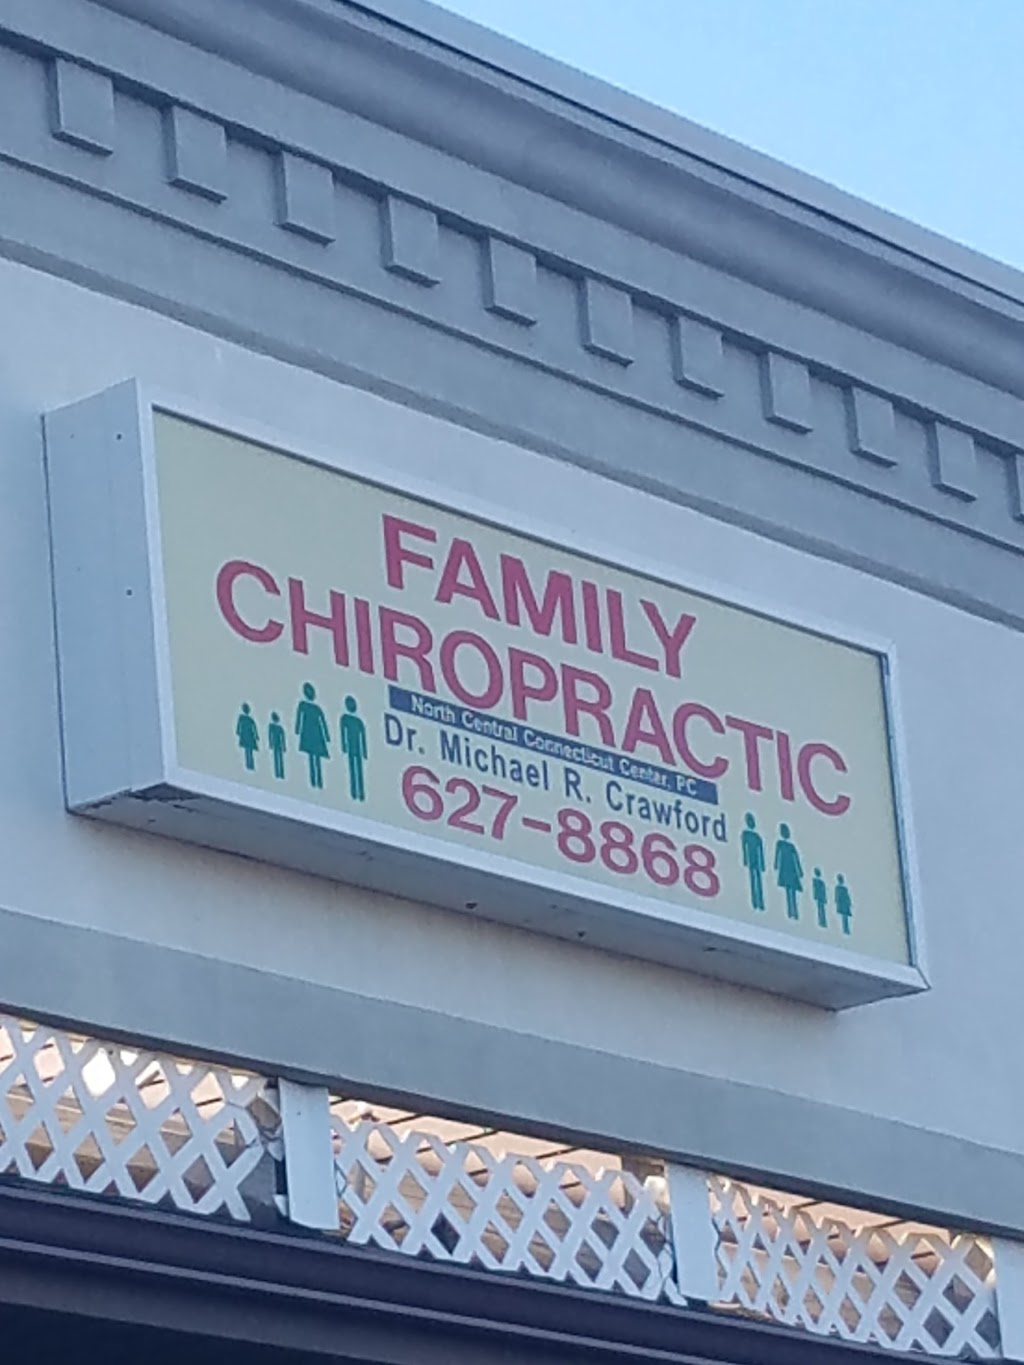 East Windsor Family Chiropractic | 122 Prospect Hill Rd, East Windsor, CT 06088 | Phone: (860) 627-8868